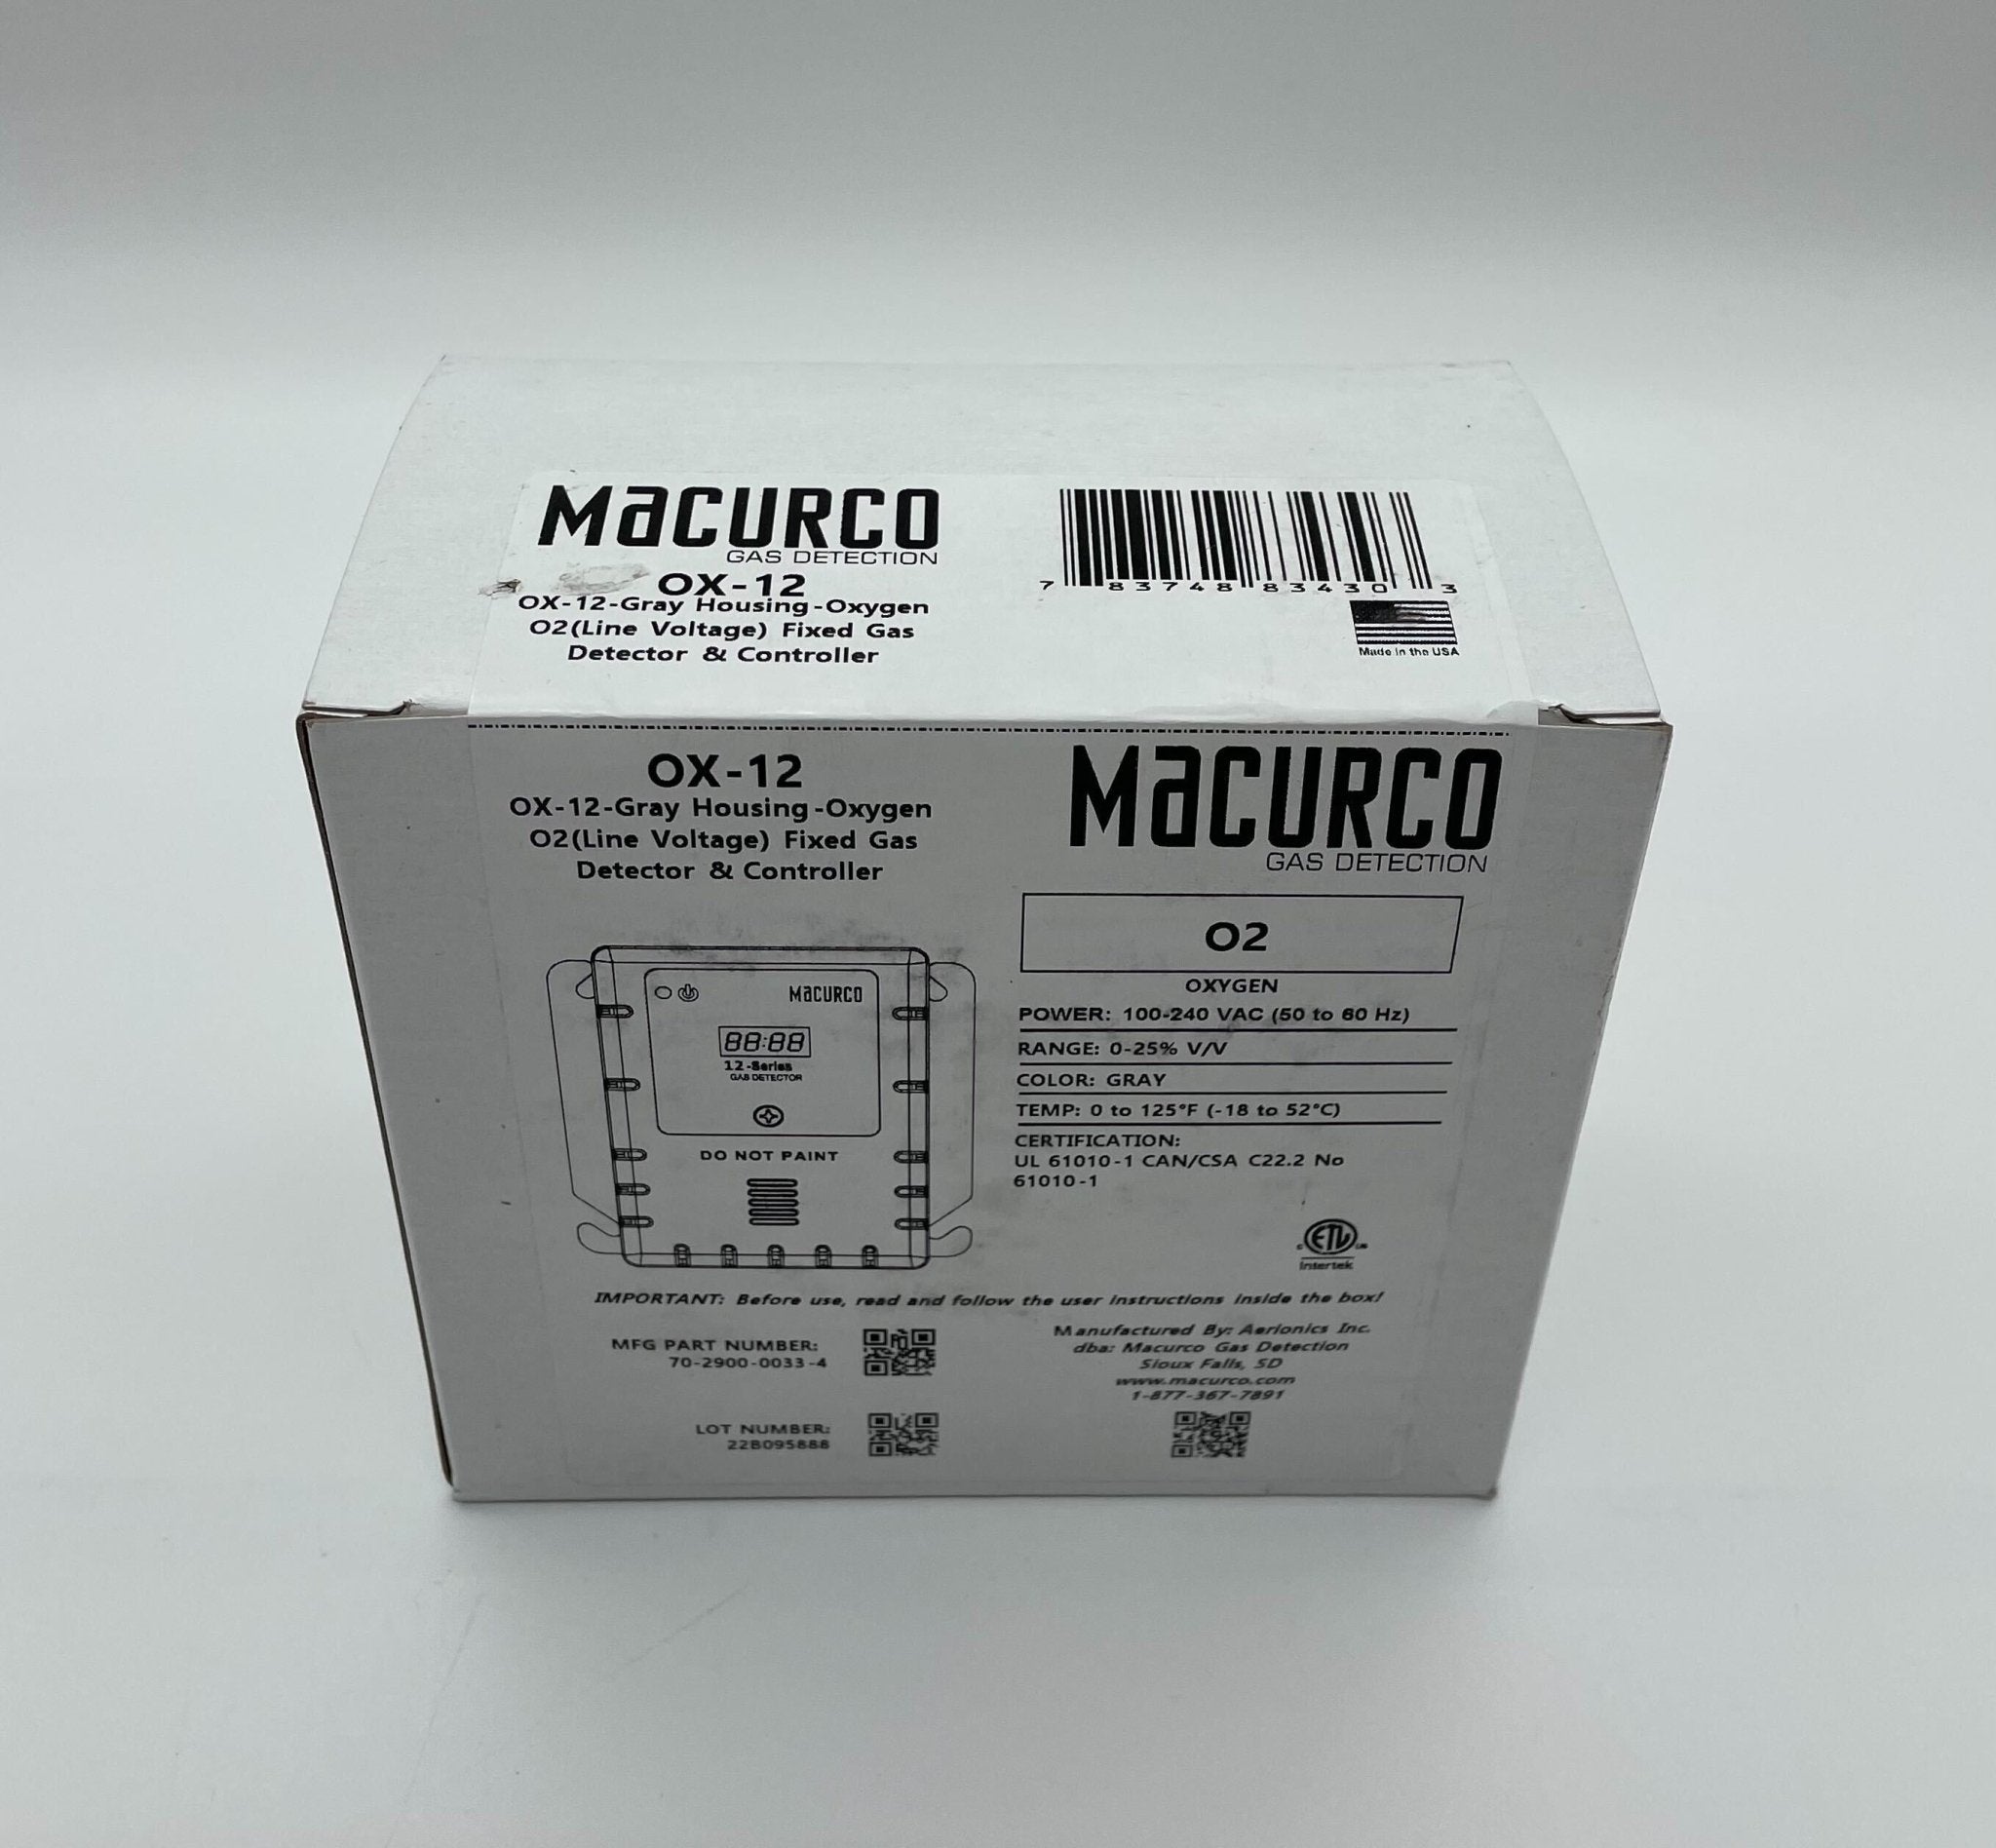 Macurco OX-12 - The Fire Alarm Supplier